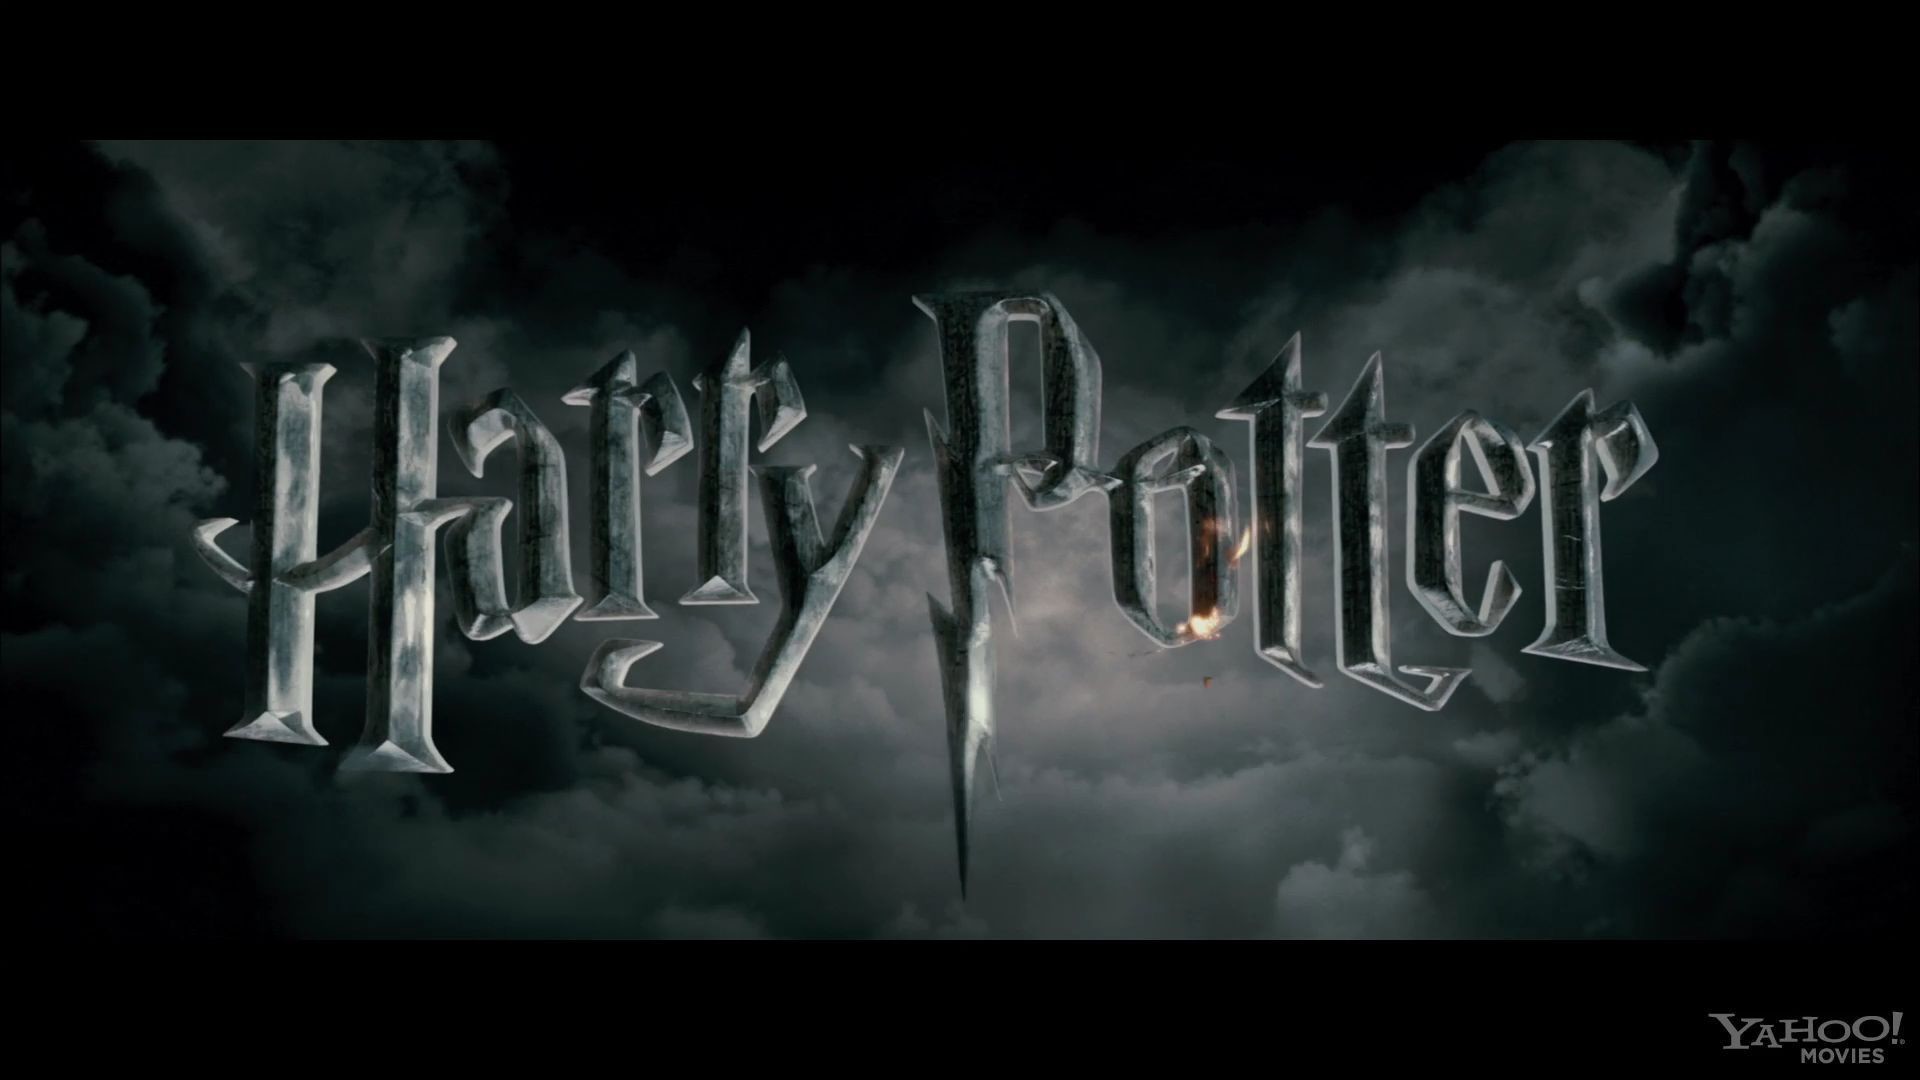 1920x1080 Best Harry Potter Wallpapers | The Art Mad Wallpapers